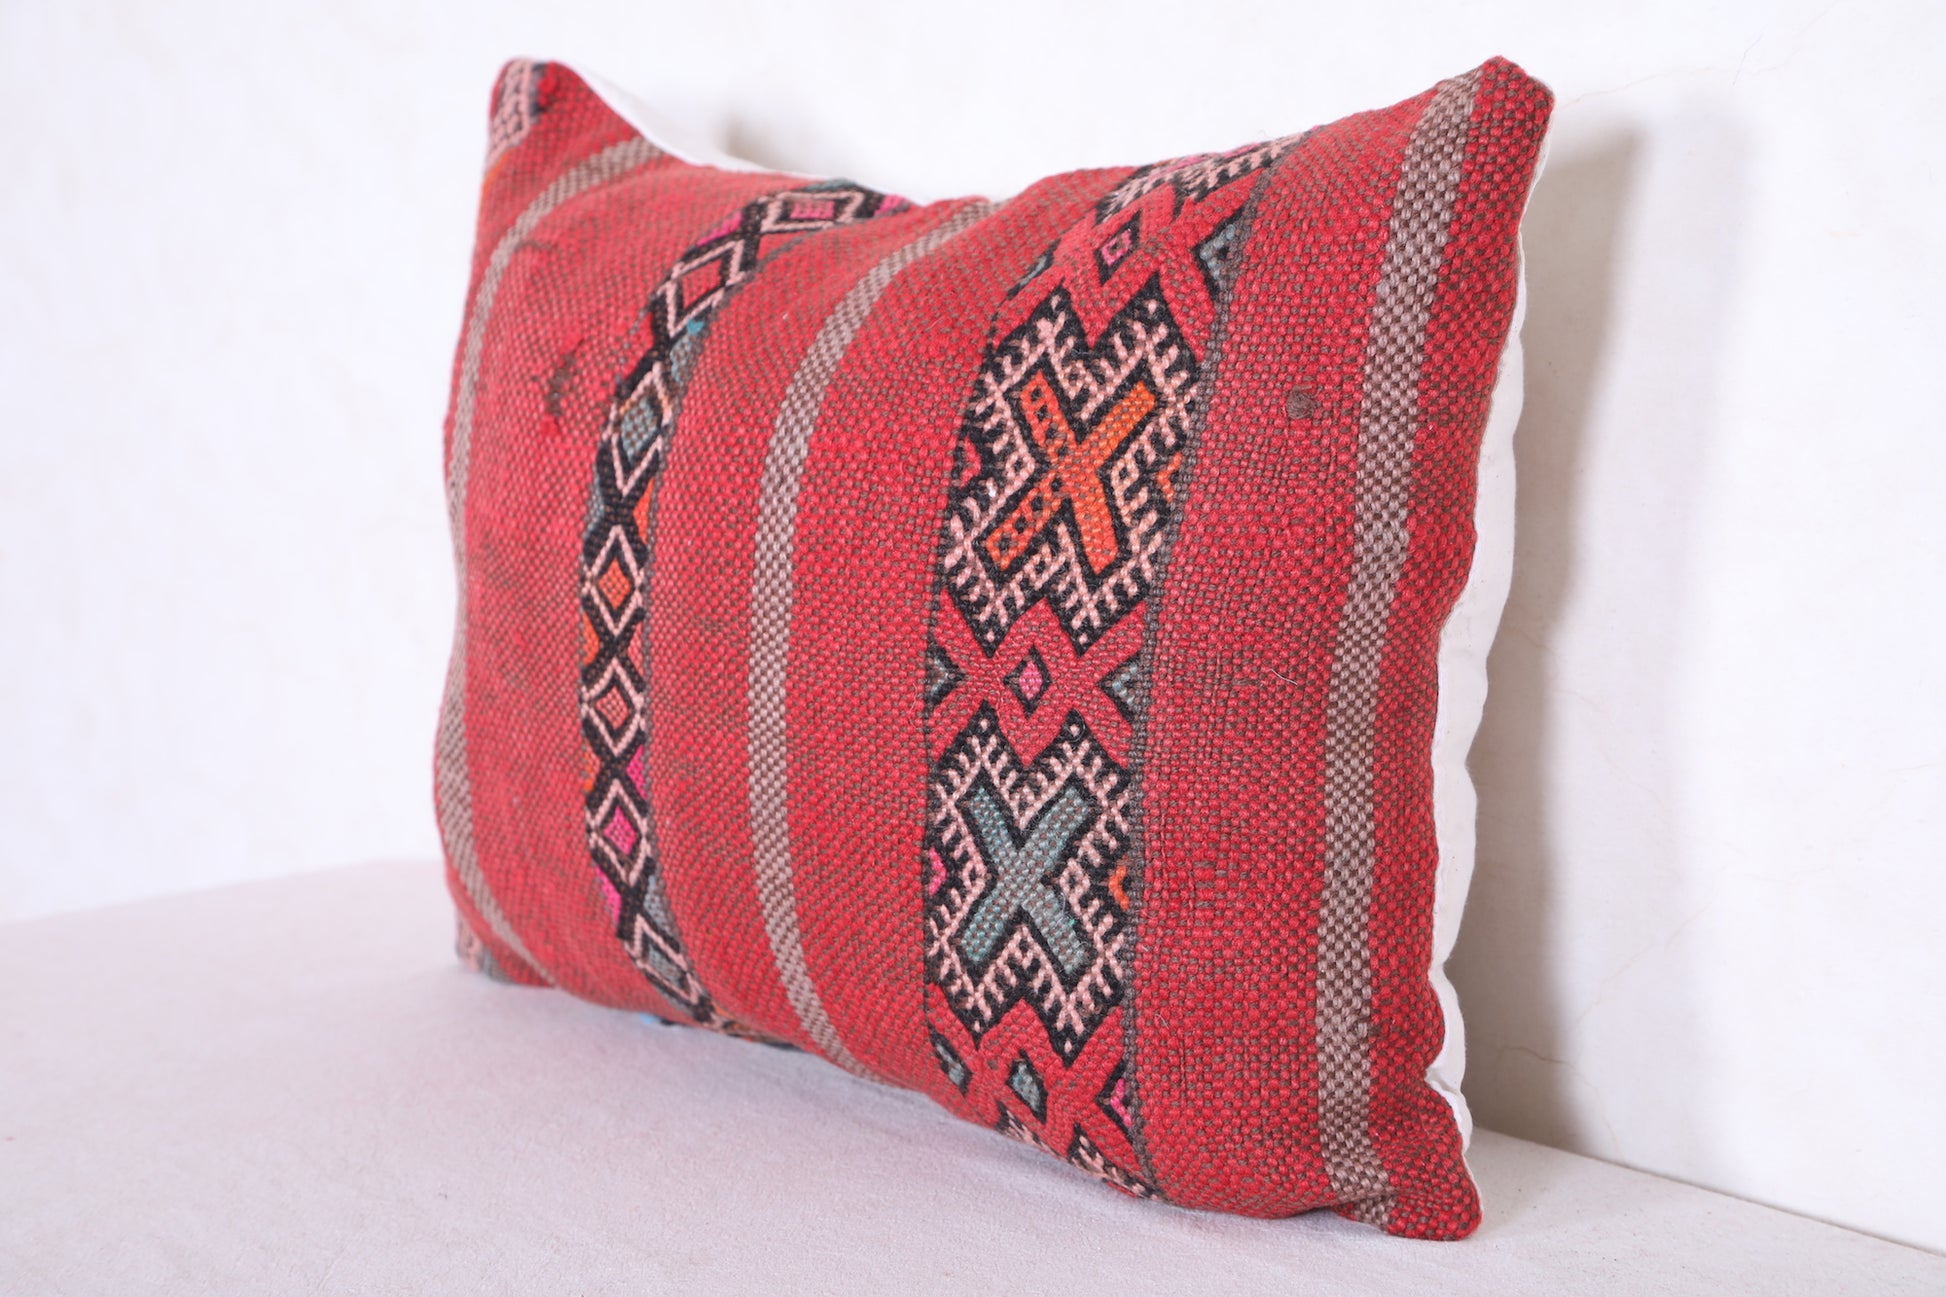 Moroccan handmade kilim pillow 15.7 INCHES X 20.8 INCHES